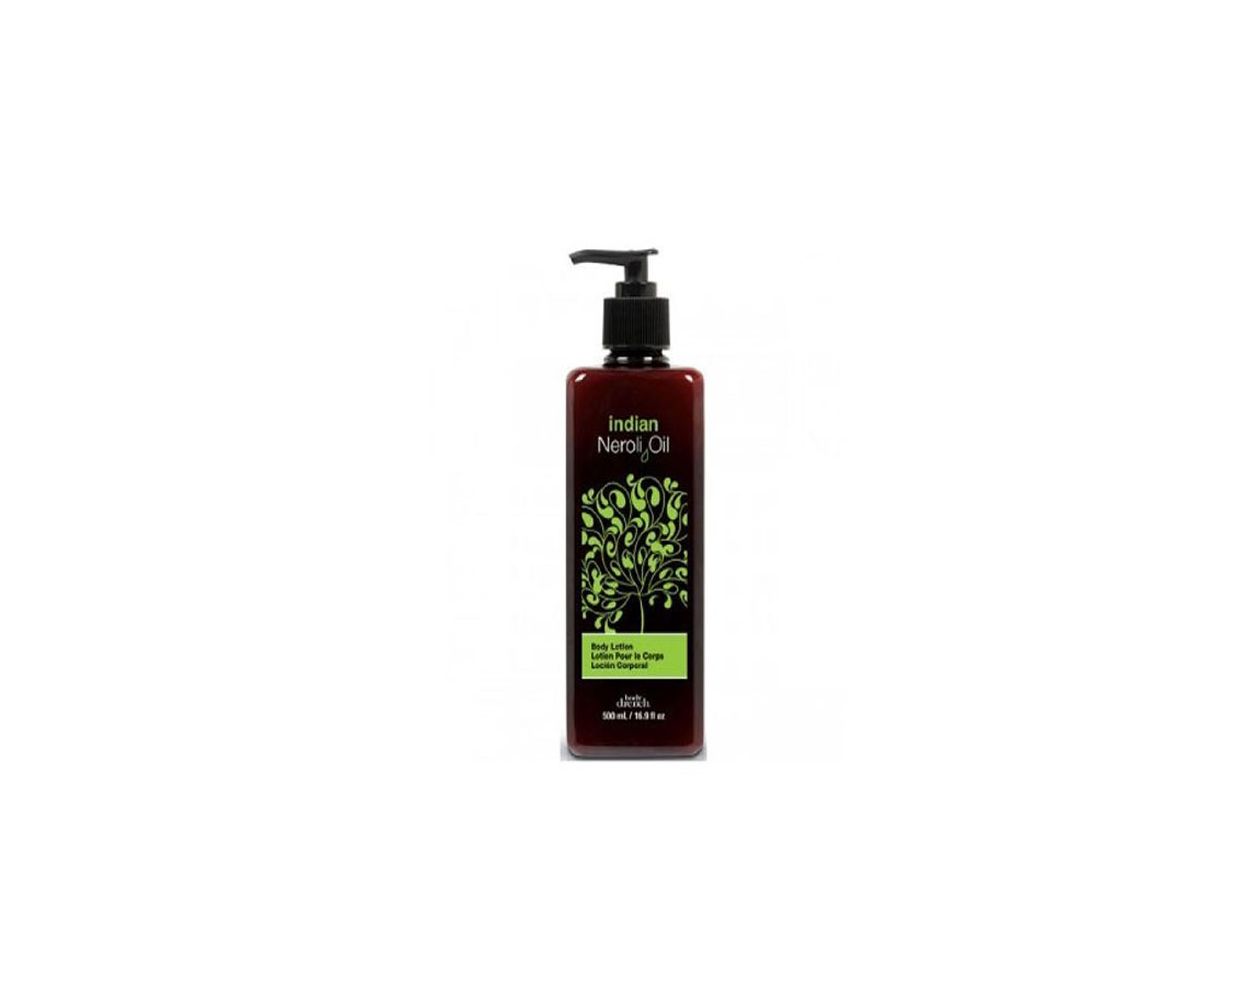 BODY DRENCH INDIAN LOTION 16.9oz